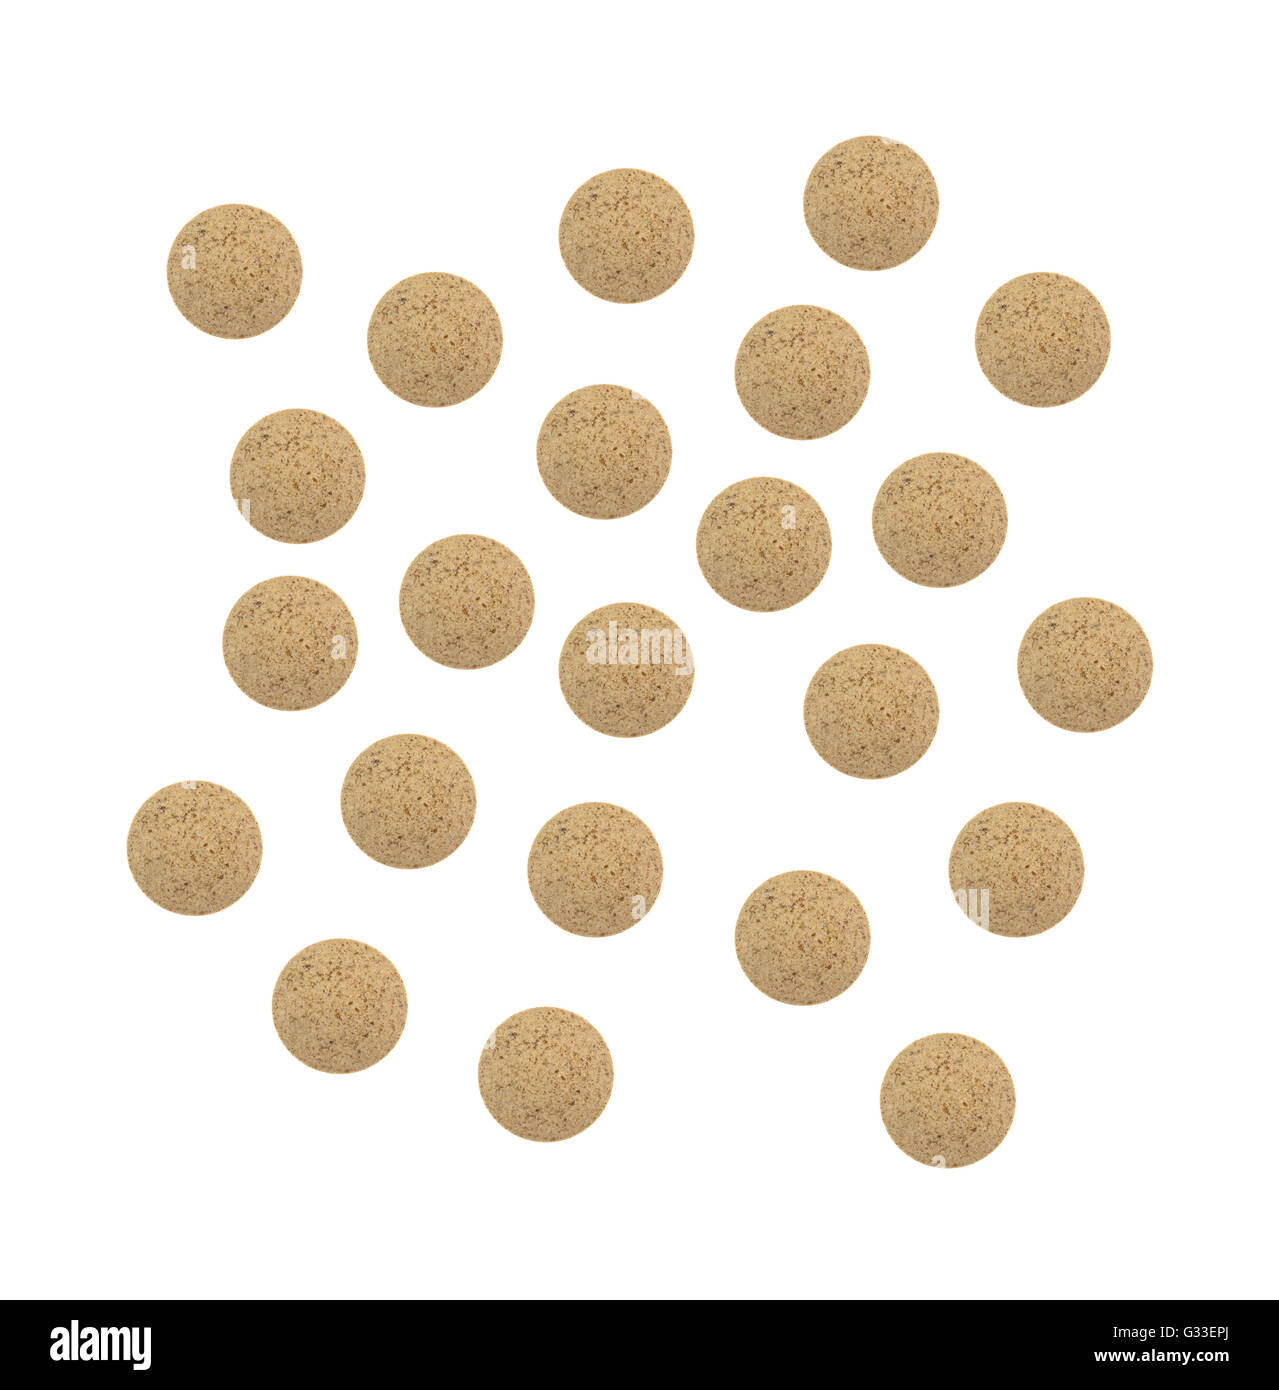 Top view of several brewer's yeast nutritional supplement tablets isolated on a white background. Stock Photo